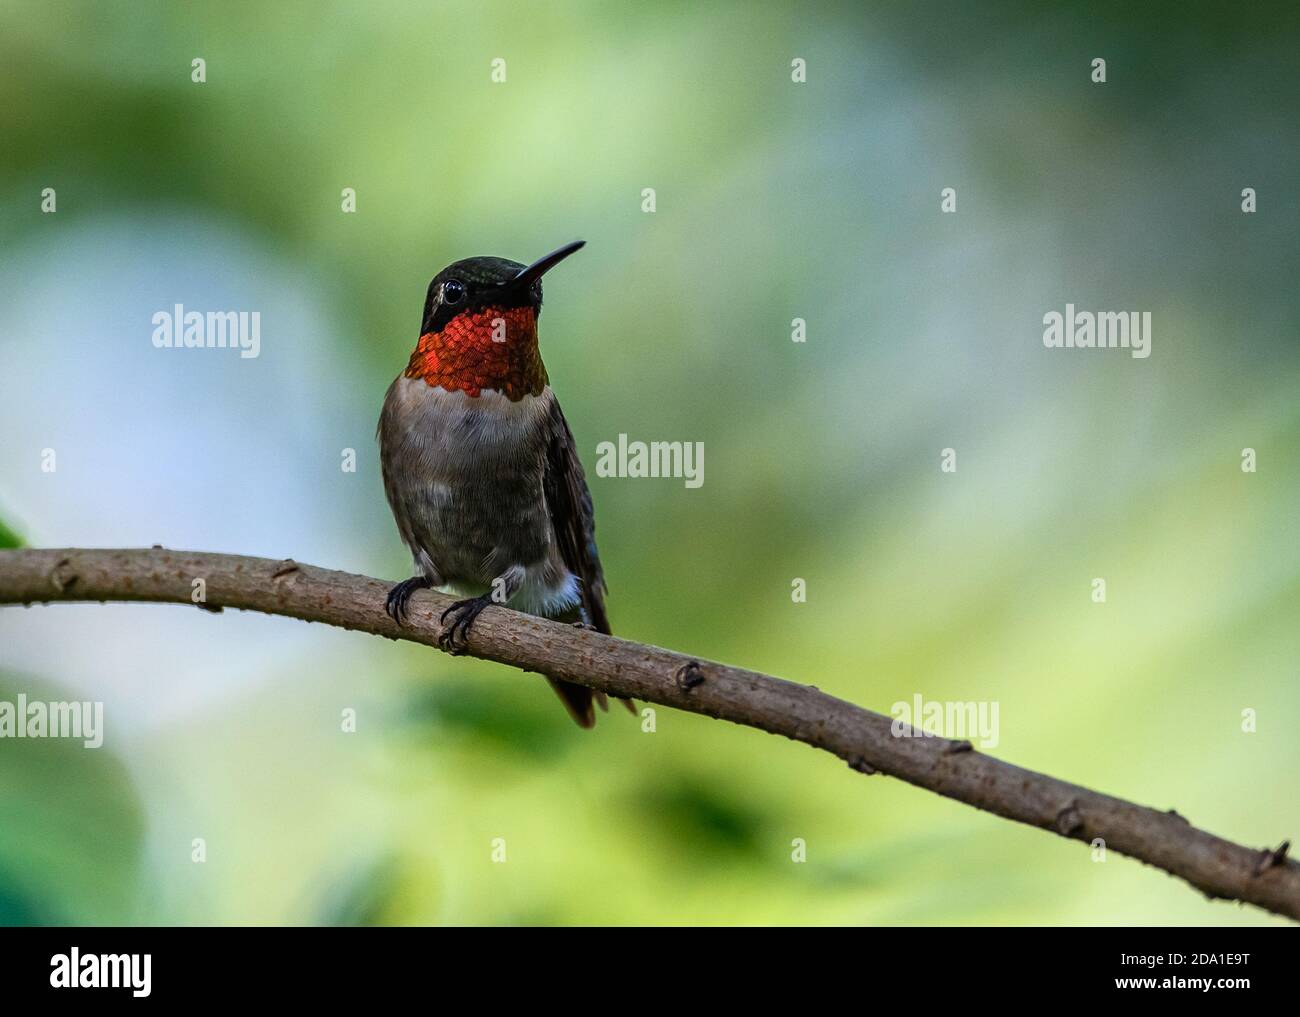 A male Ruby-throated Hummingbird (Archilochus colubris) with bright ruby red throat feathers. Houston, Texas, USA. Stock Photo